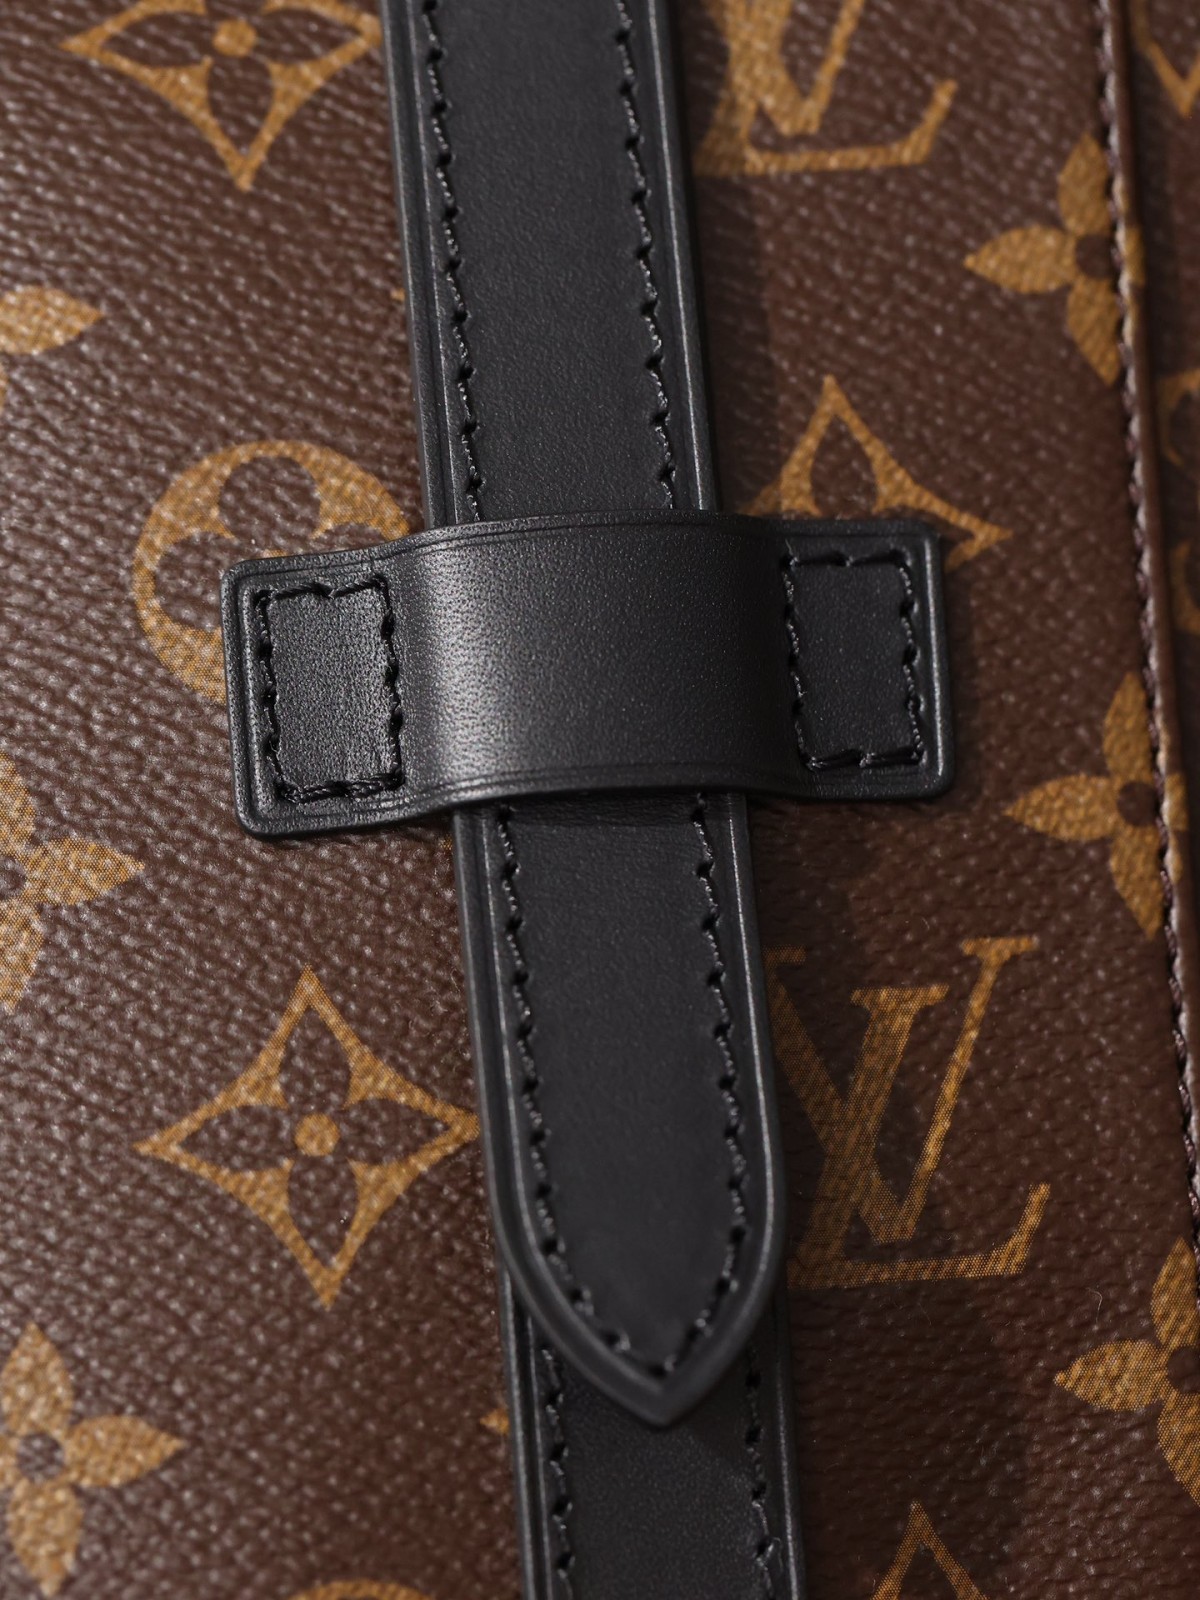 The Louis Vuitton Christopher Backpack: A Remarkable Replication by Shebag Company (2023 Week 43)-Best Quality adịgboroja Louis vuitton akpa Online Store, oyiri mmebe akpa ru